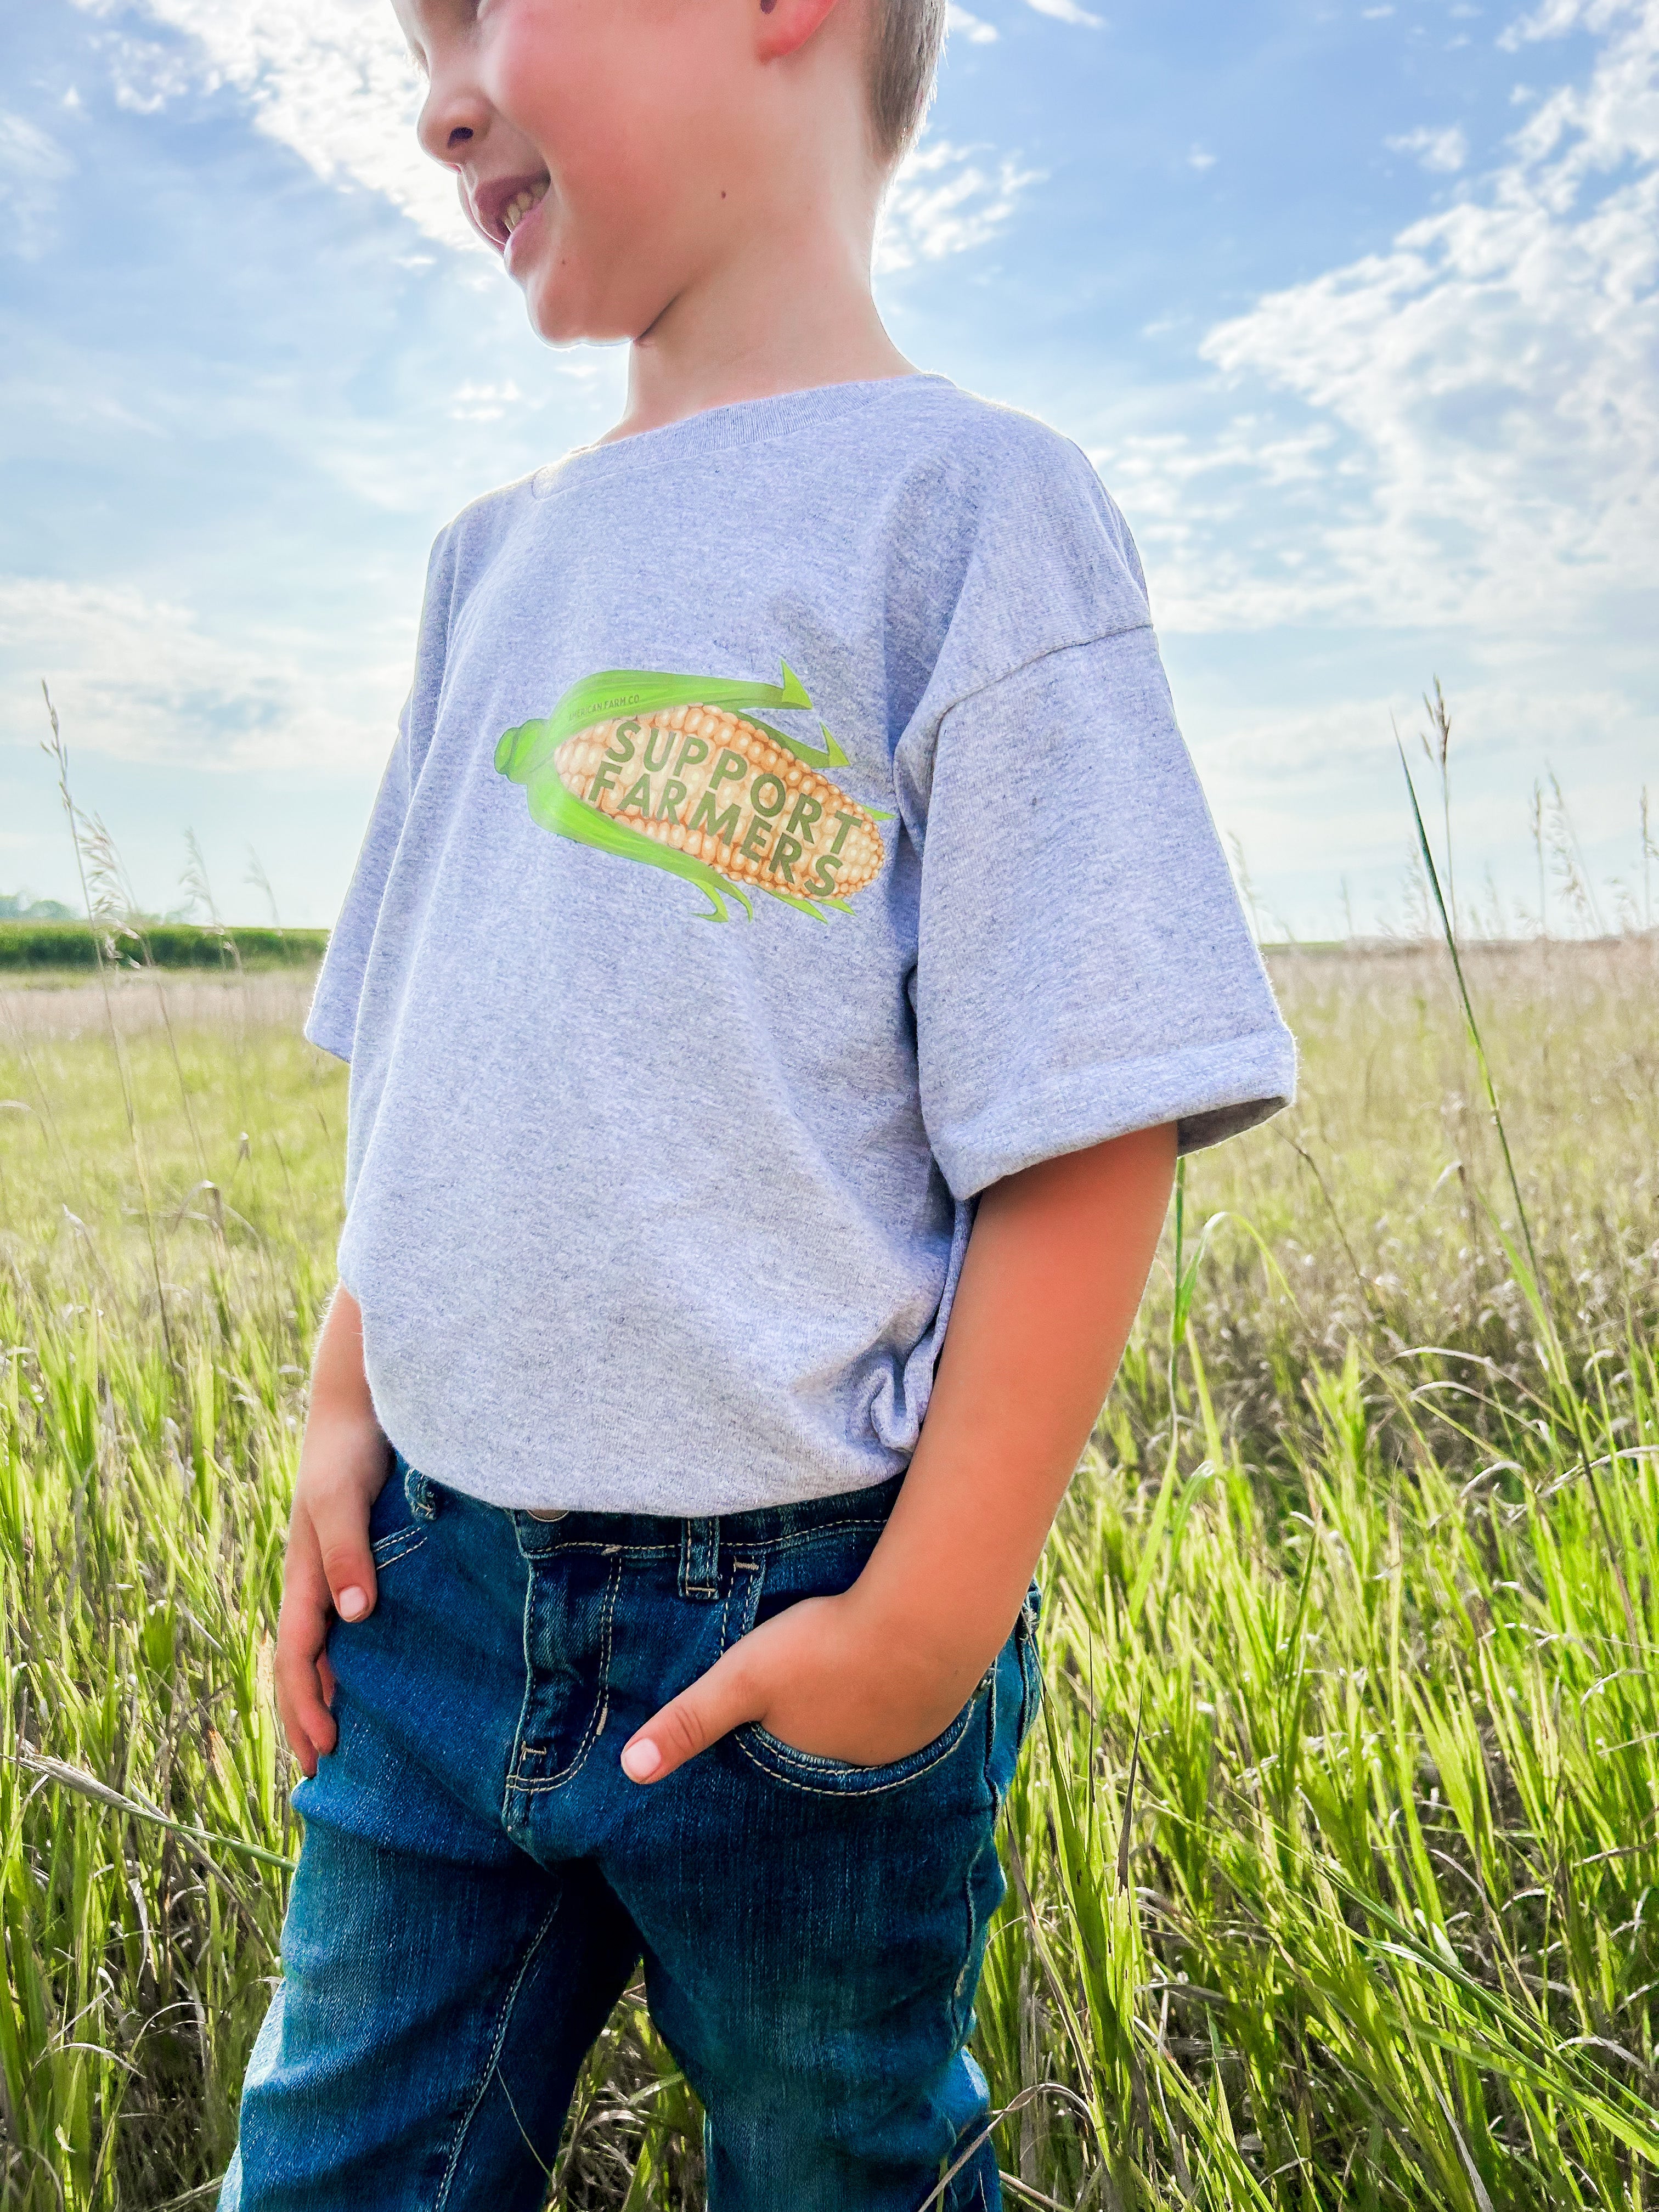 ‘Support Farmers’ Corn Tee- Youth